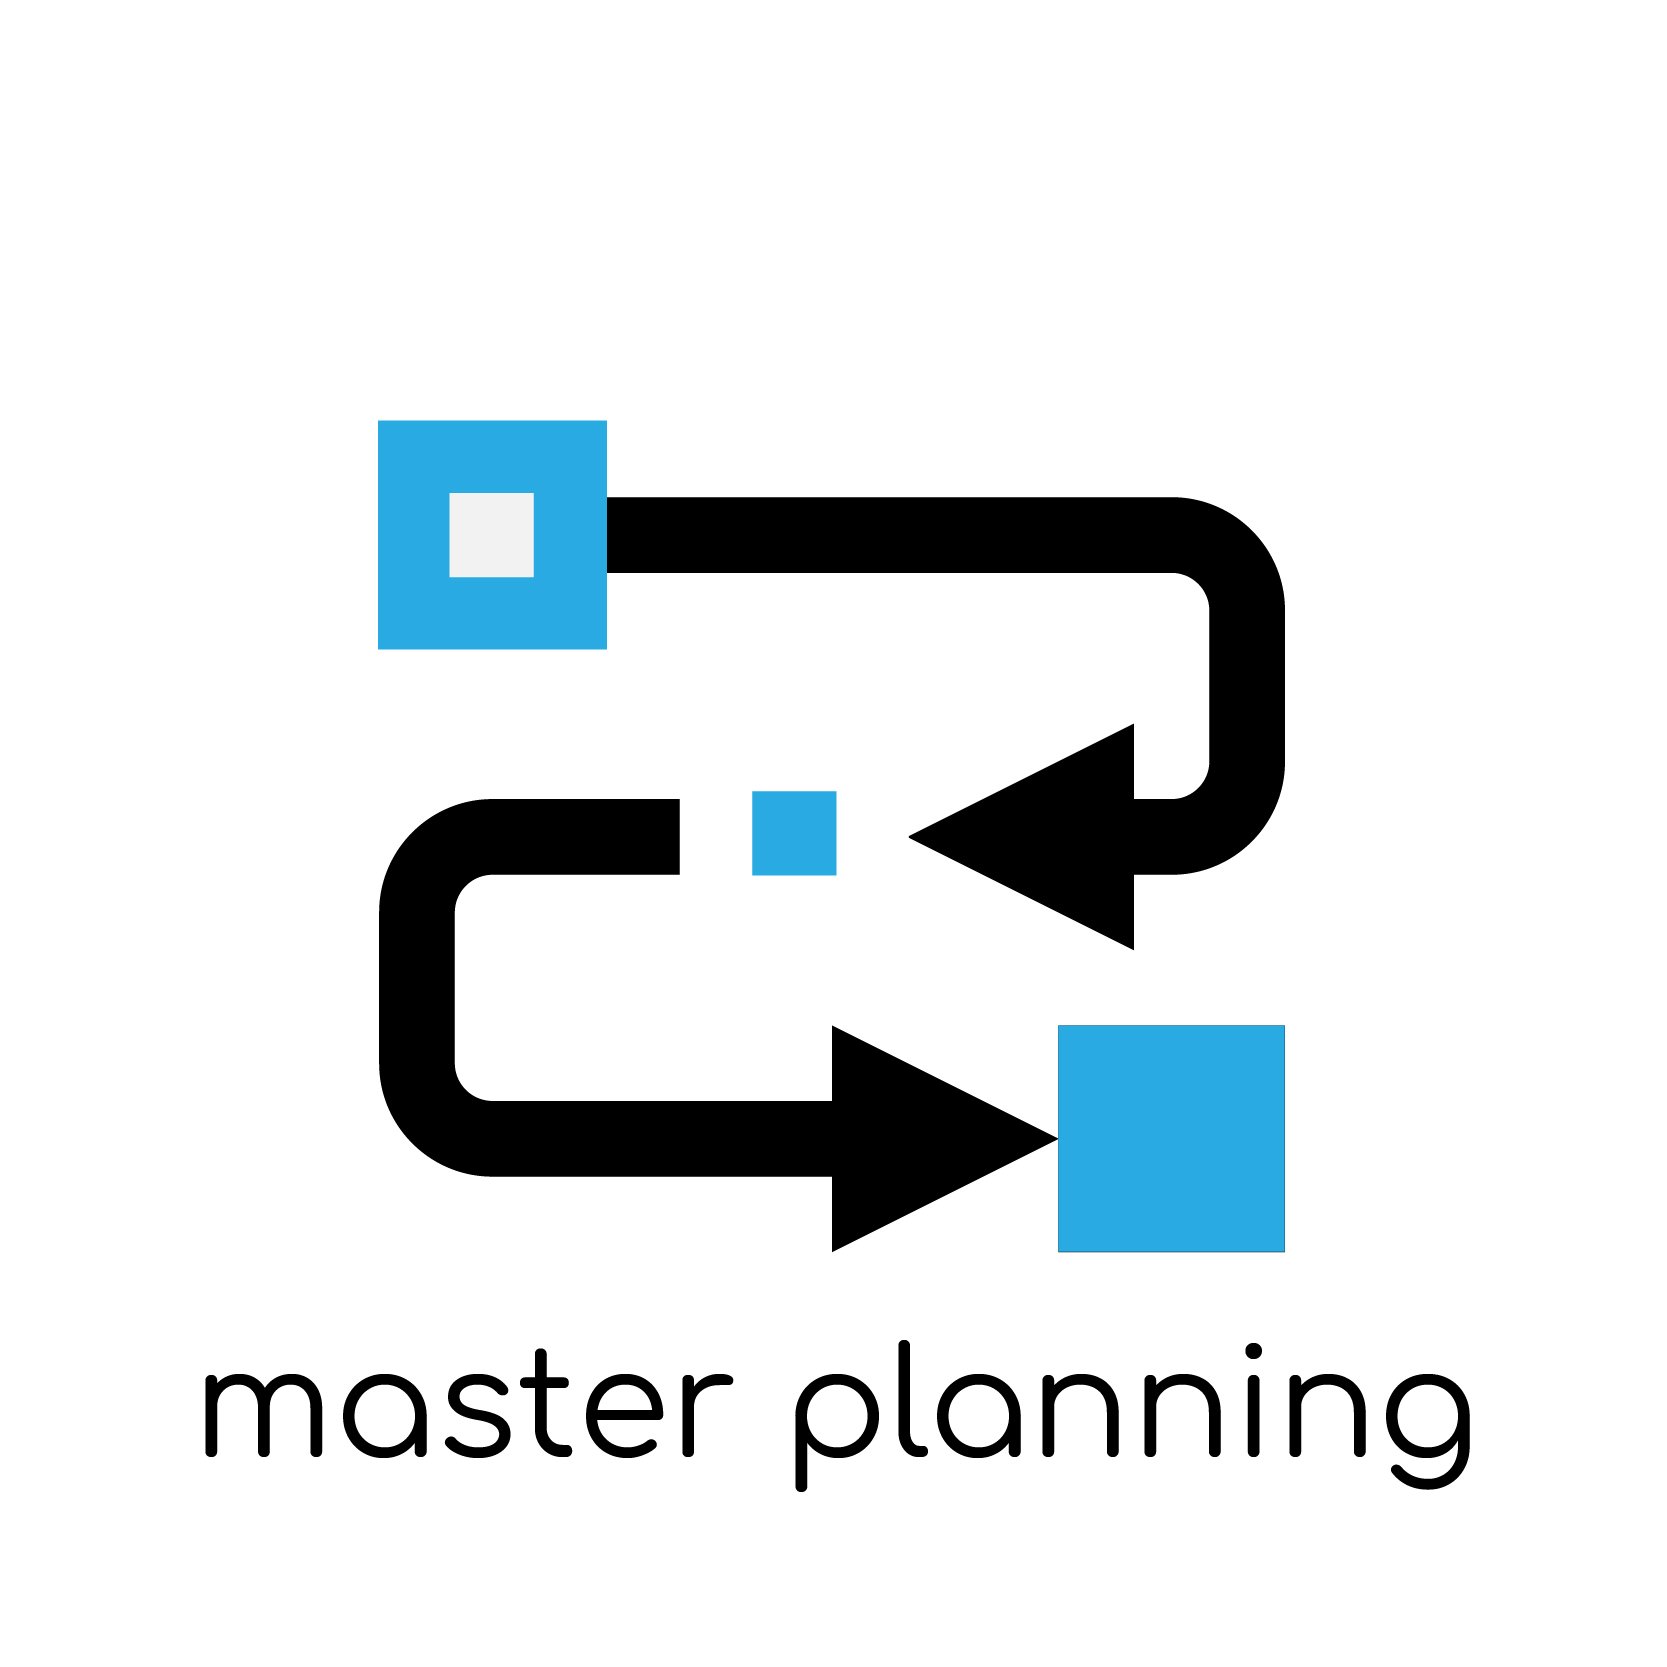 core service: master planning